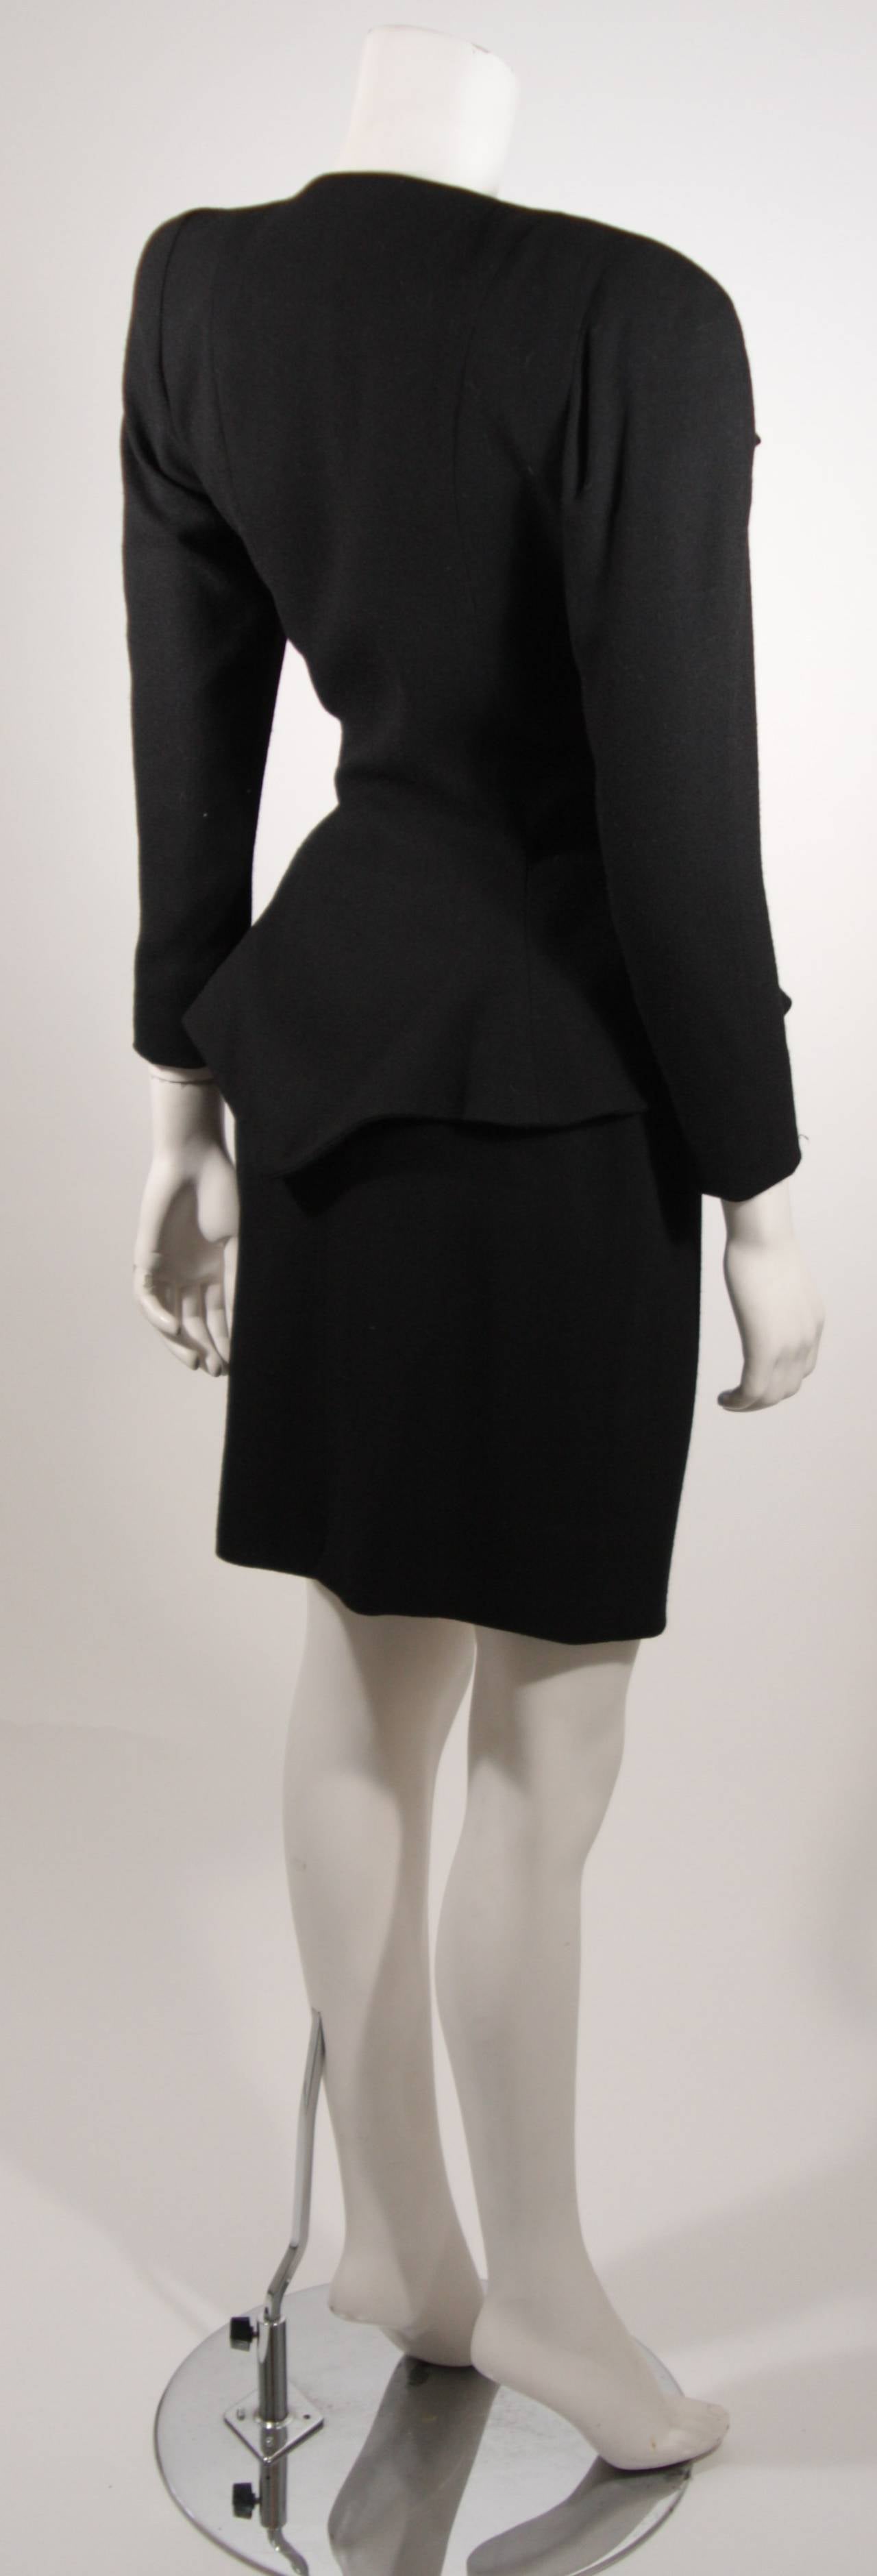 Travilla Black Structured Skirt Suit Size 8 For Sale 1